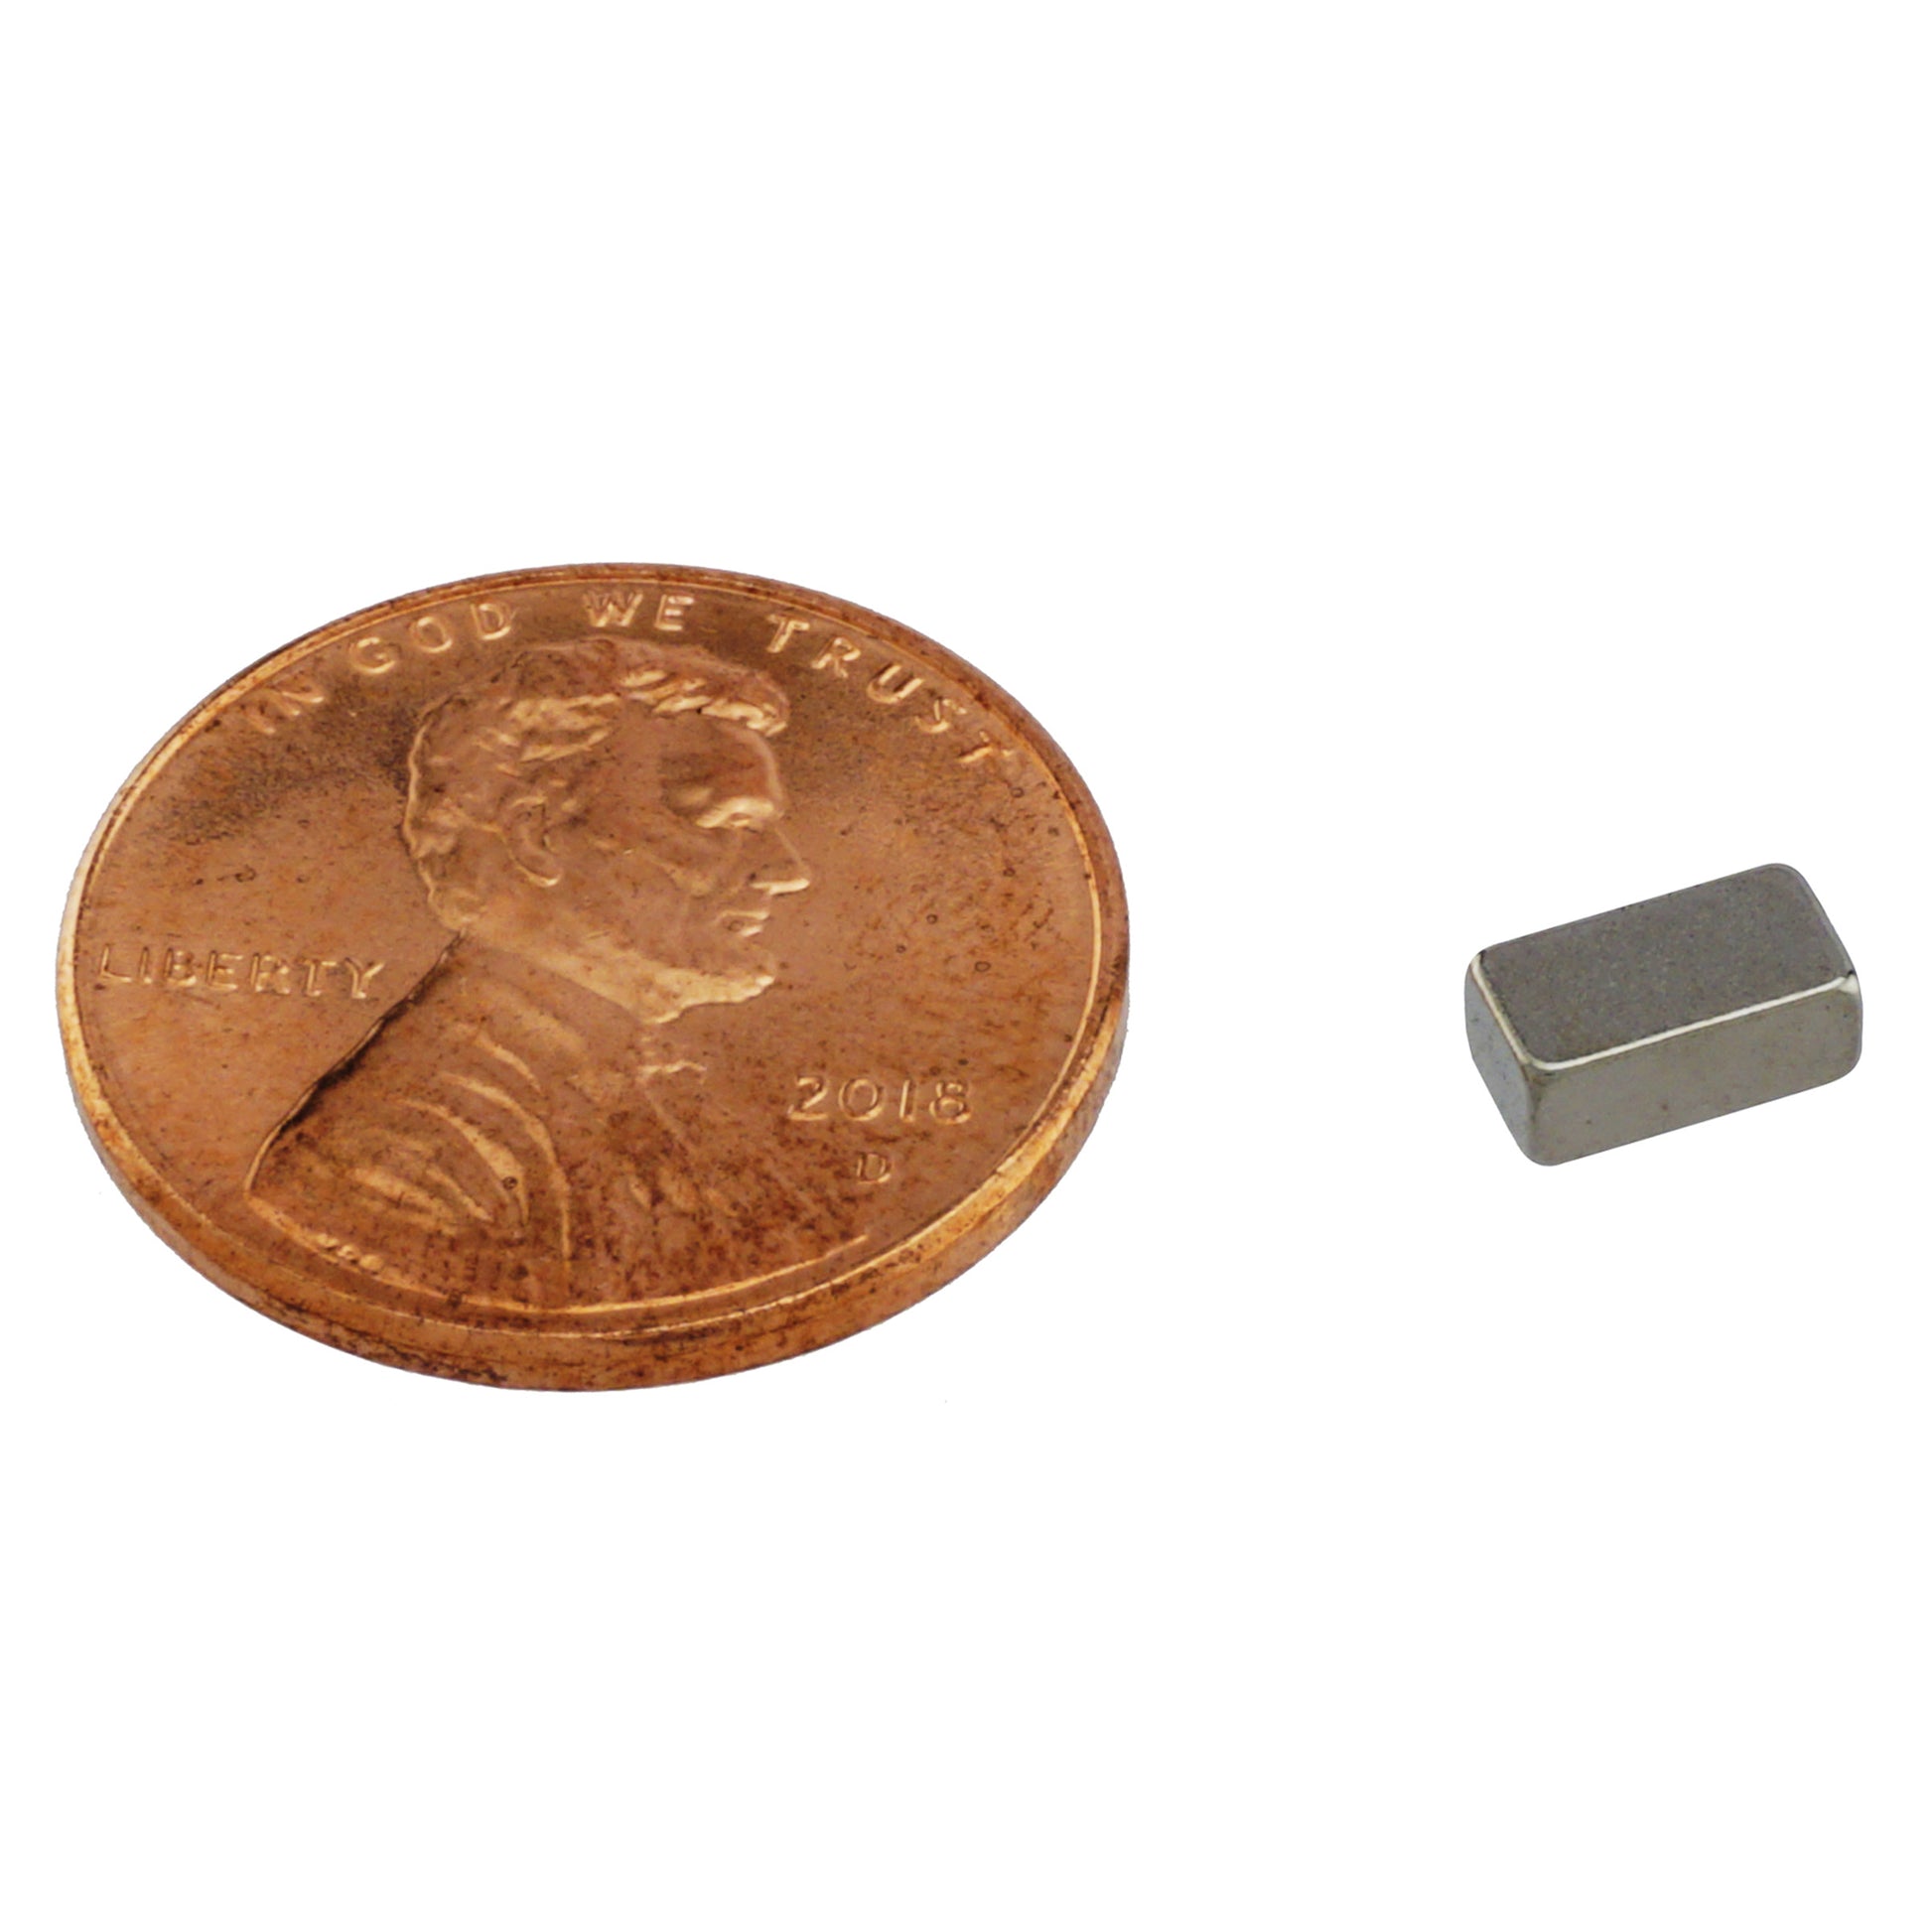 Load image into Gallery viewer, NB11325N-35 Neodymium Block Magnet - Compared to Penny for Size Reference